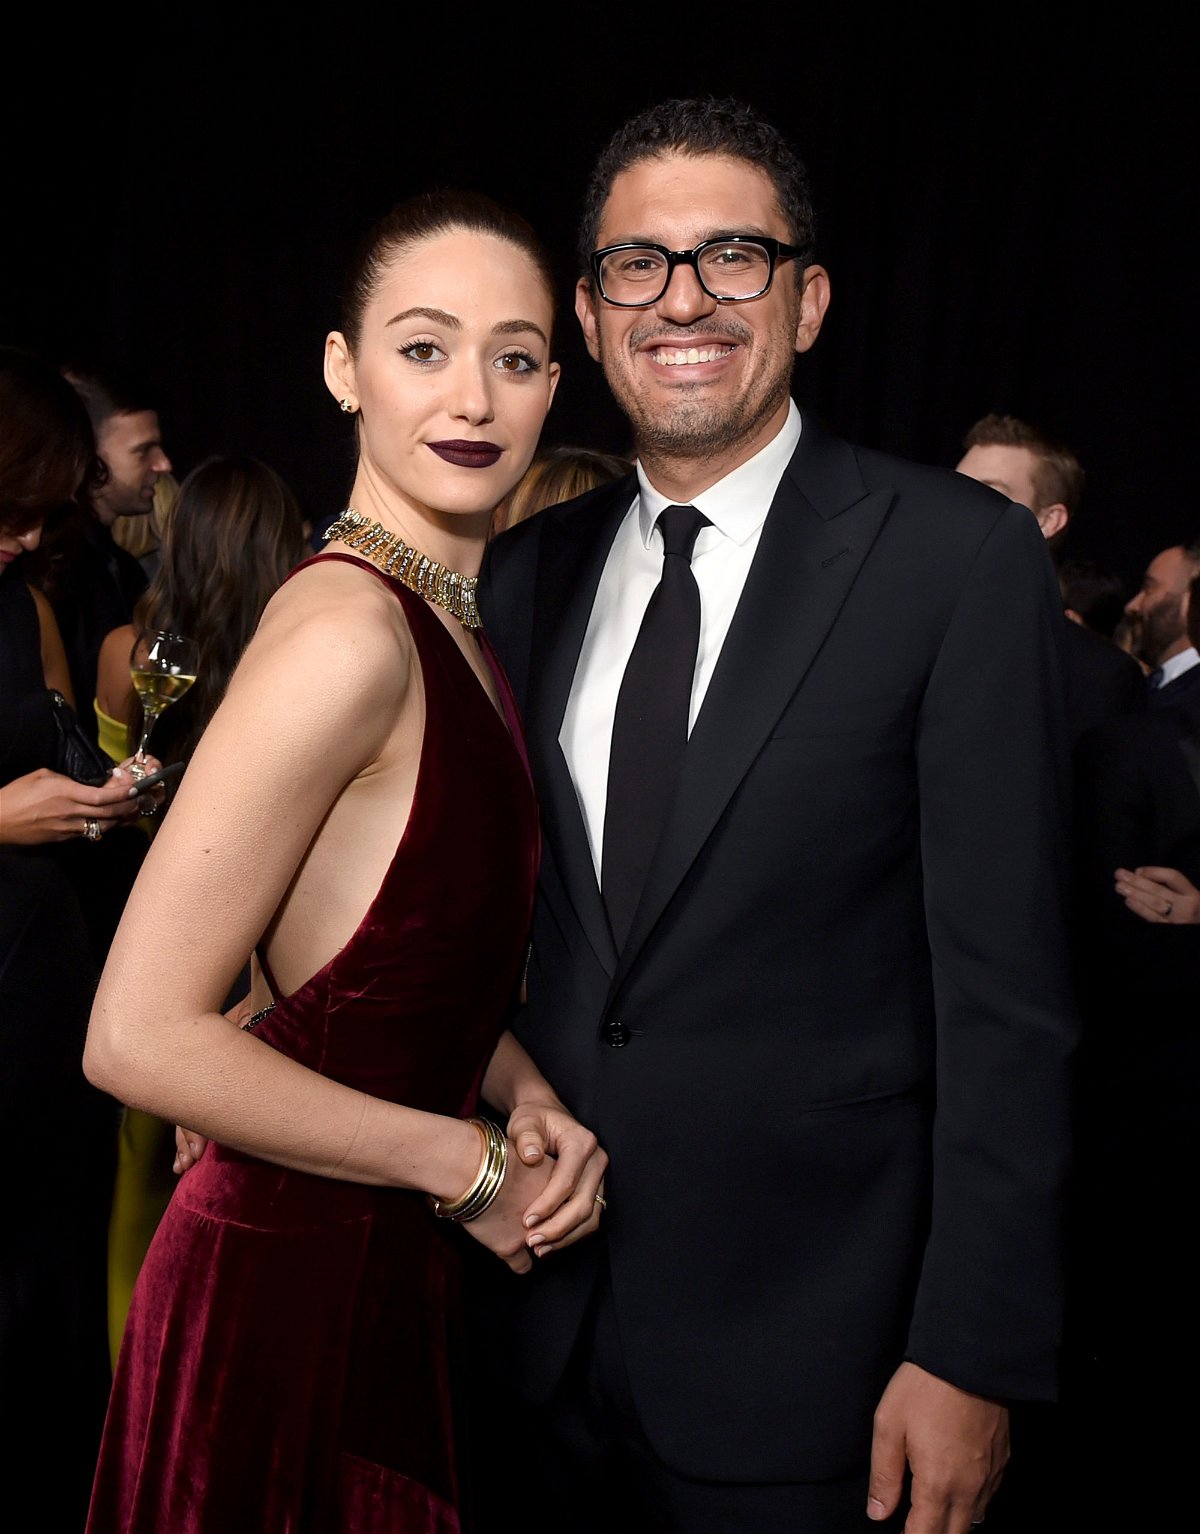 <i>Kevin Winter/Getty Images for The Critics' Choice Awards</i><br/>(From left) Emmy Rossum and Sam Esmail are seen here in 2019 at the Critics' Choice Awards in Santa Monica.